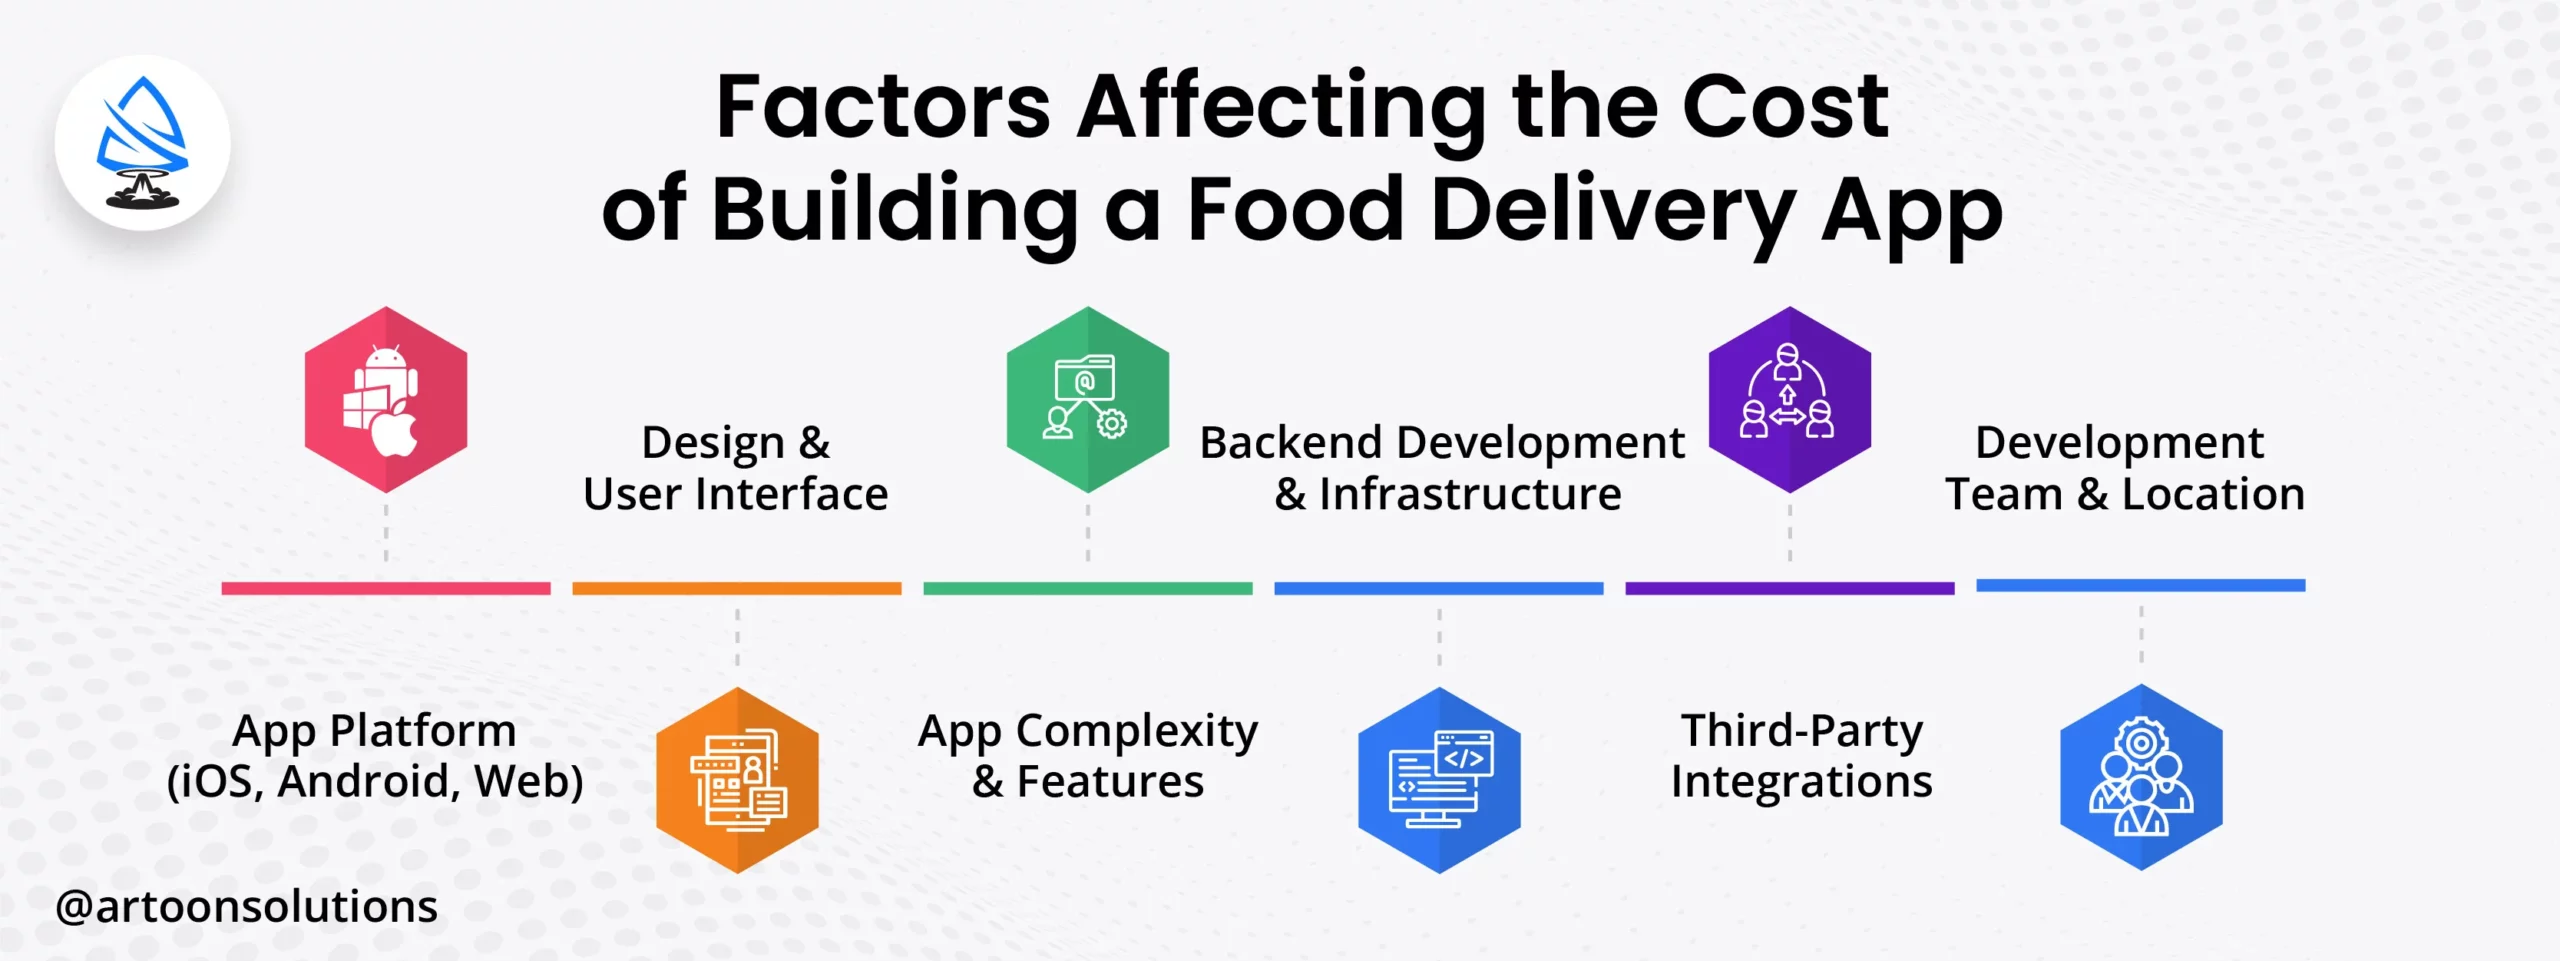 Cost of Building a Food Delivery App